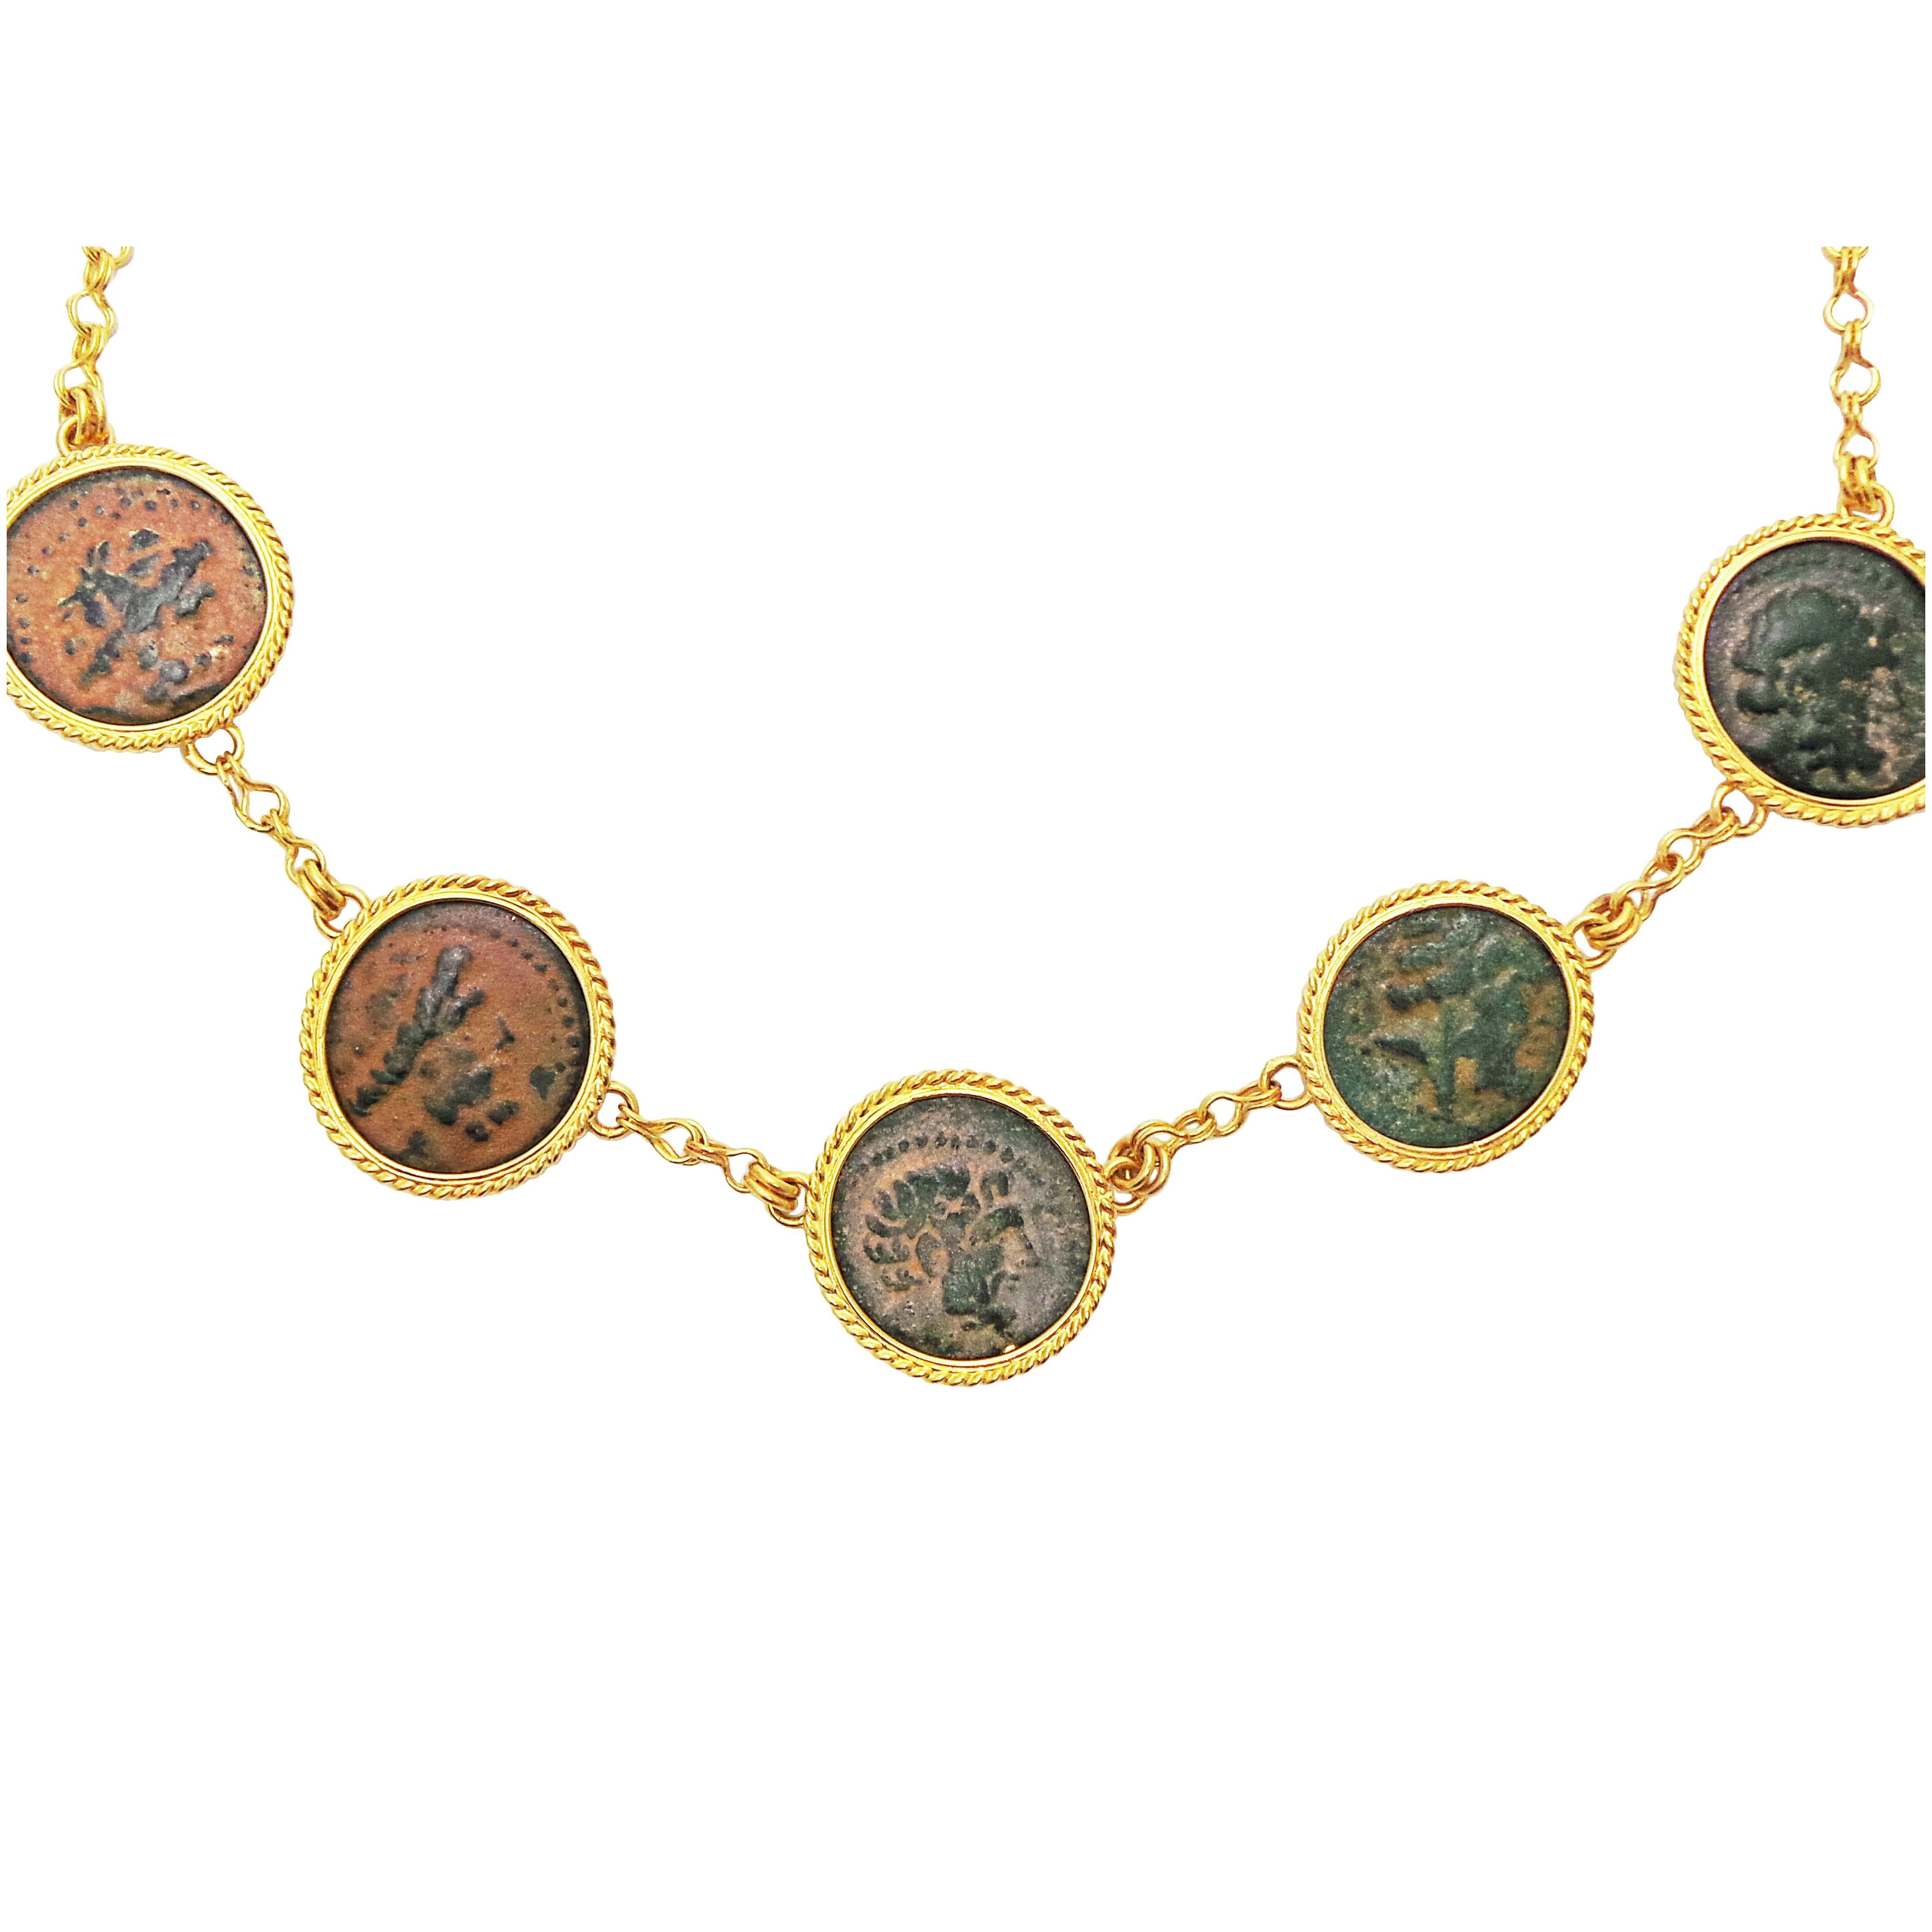 Five authentic ancient Hellenistic bronze coins (Arados in Phoenicia; 206-140 BC) set in 22k yellow gold rope bezels.  Each coin is set fixed in a 22k yellow handmade chain. Although these five coins are the same type of coin, they each have their